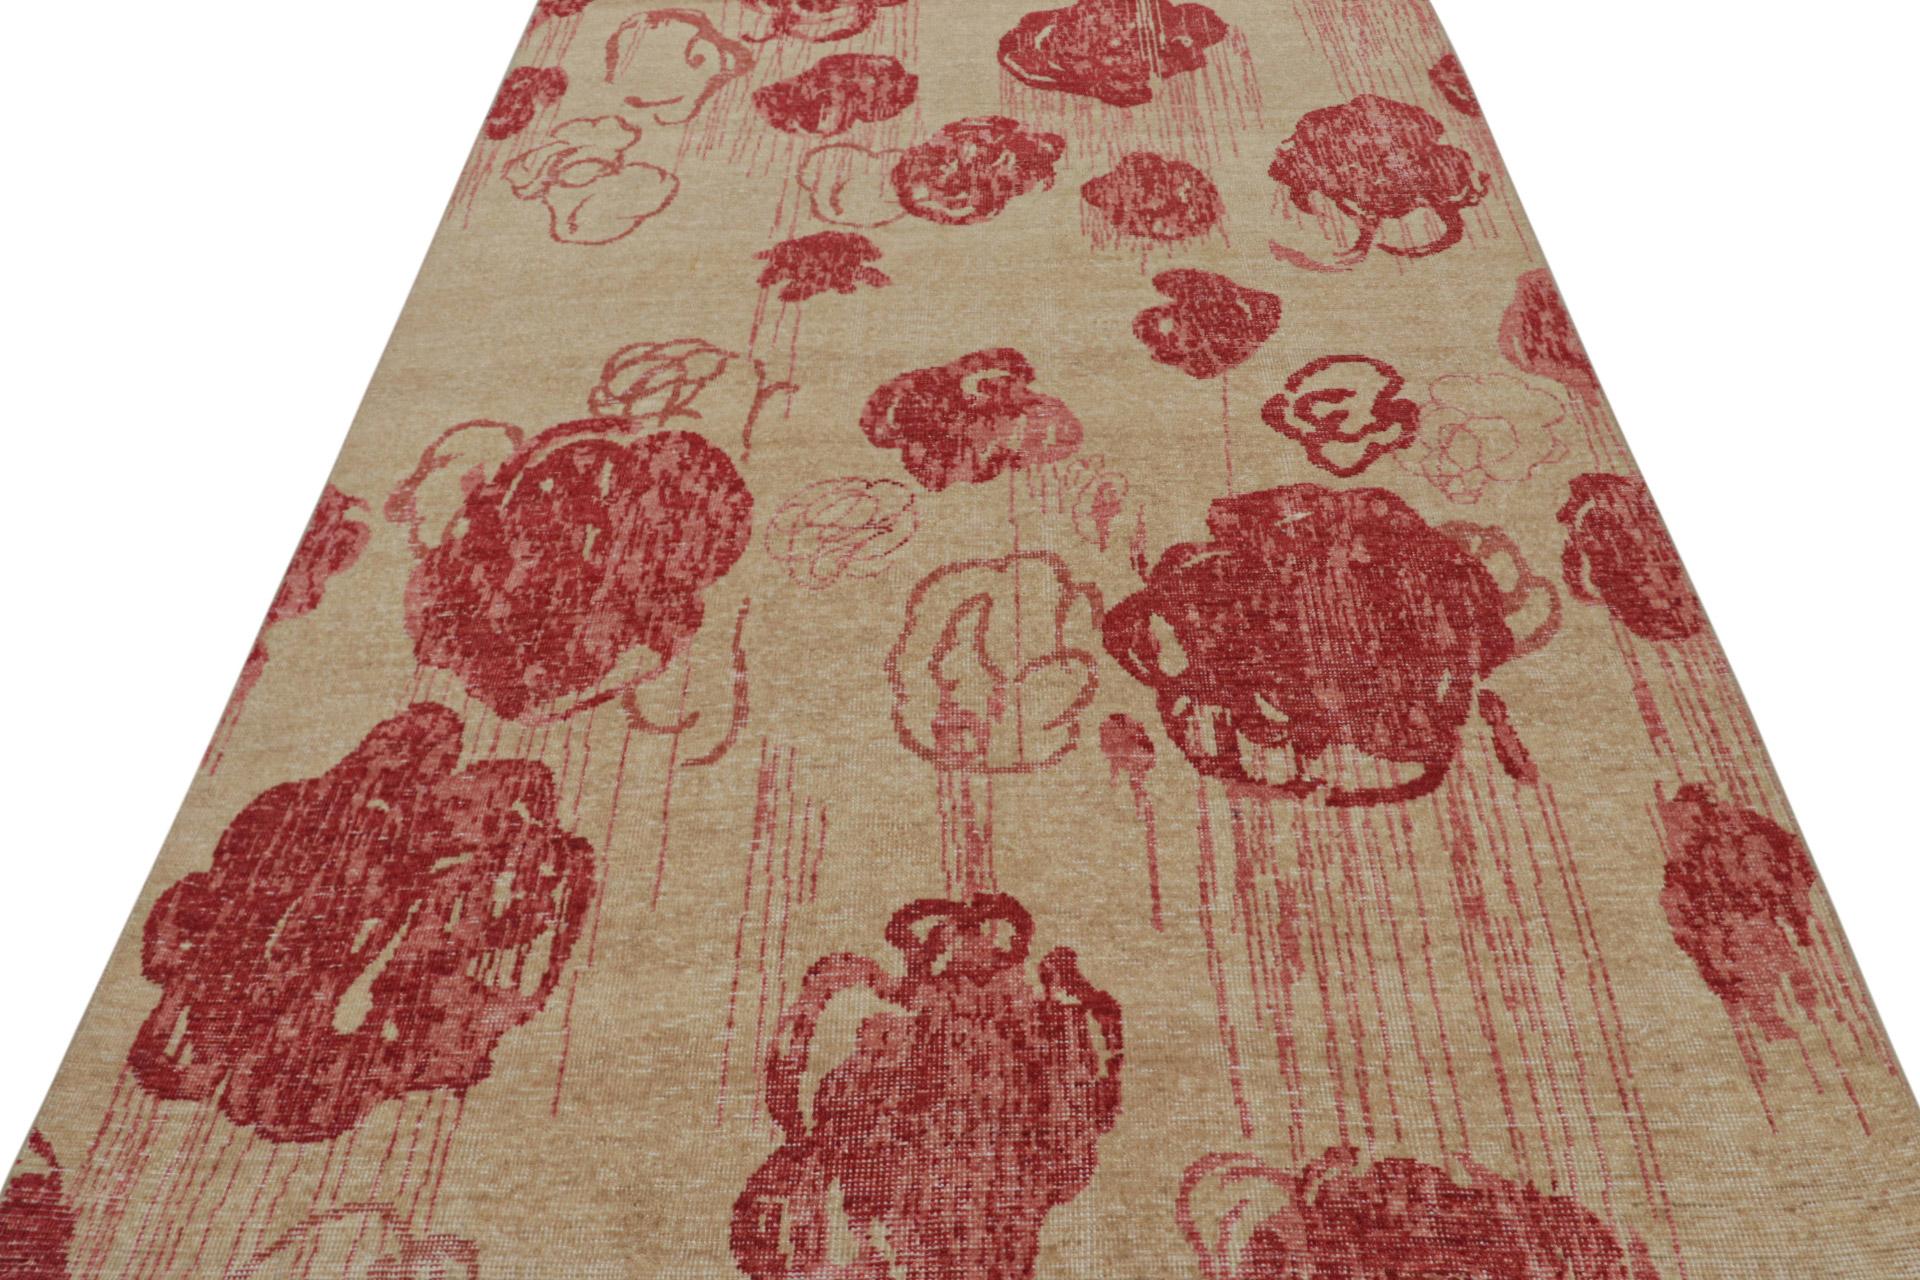 Indian Rug & Kilim’s Modern Abstract Art Rug in Beige-Brown, with Red Floral Patterns For Sale